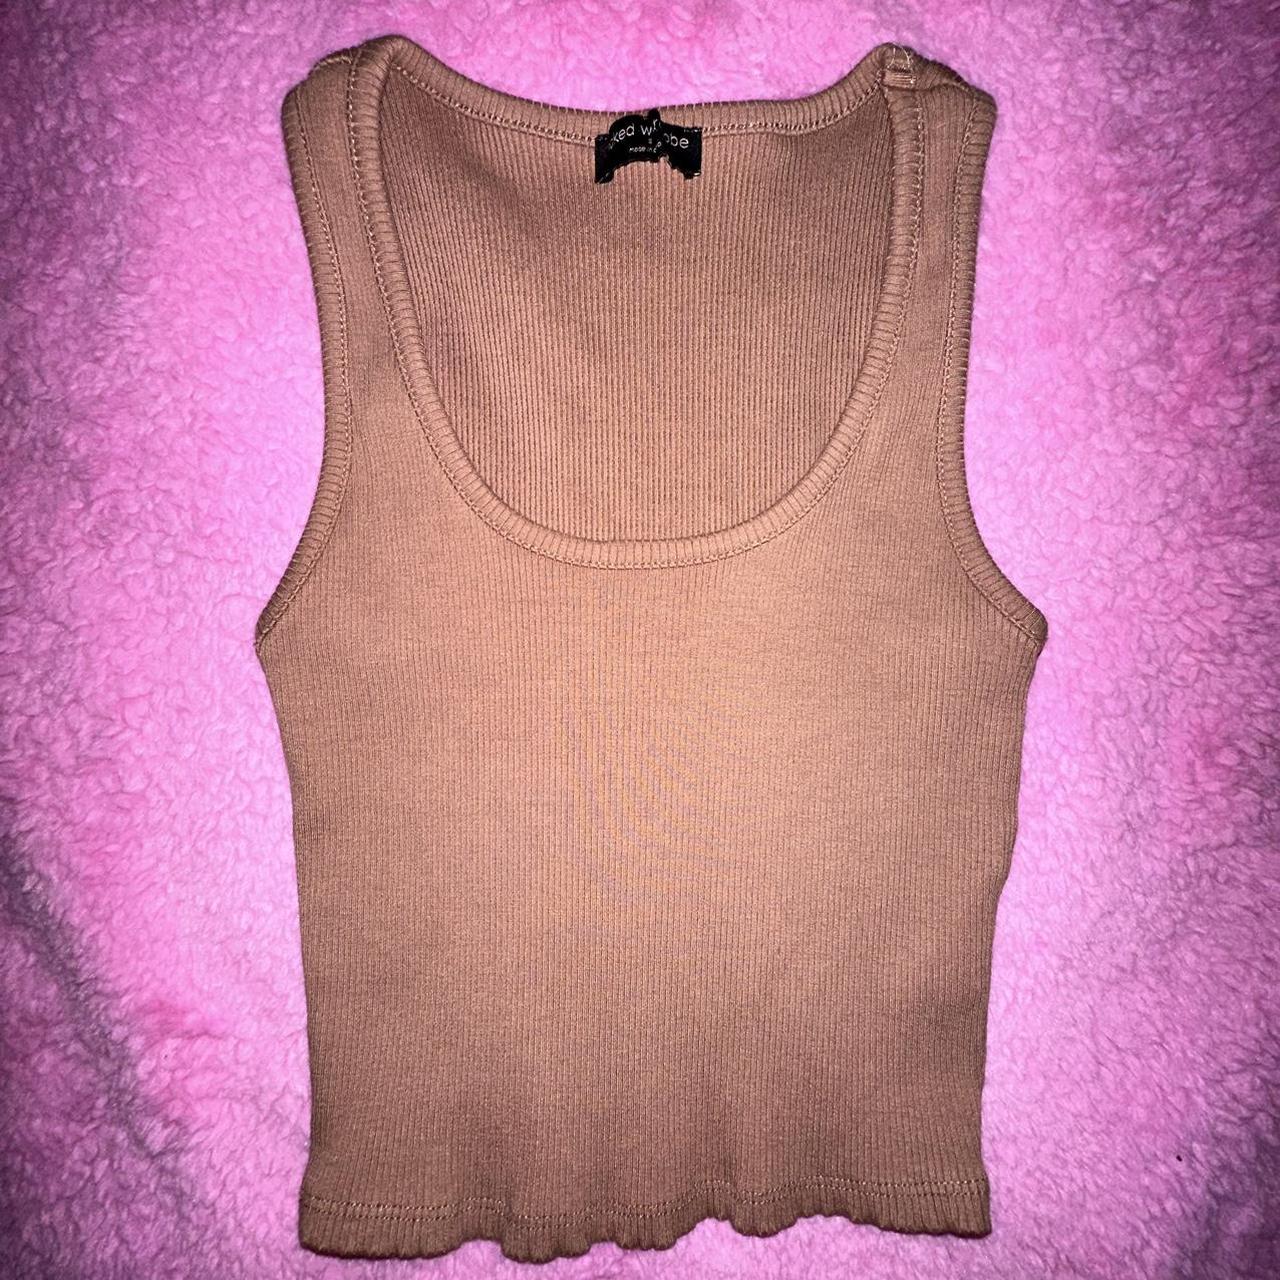 Naked Wardrobe tight fitting tank top. Size small - Depop